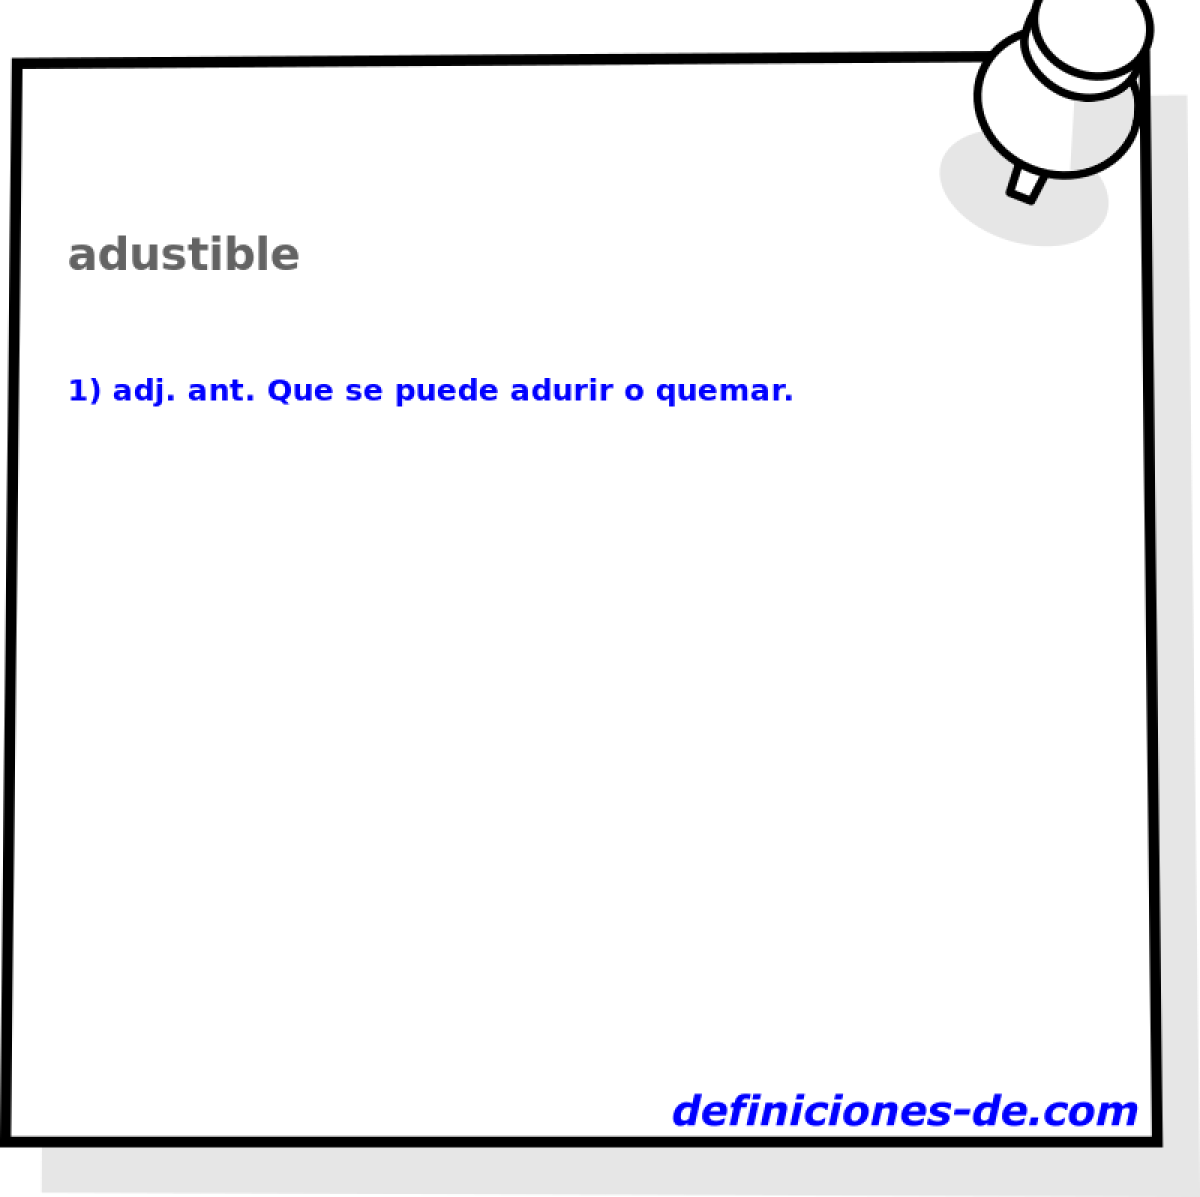 adustible 